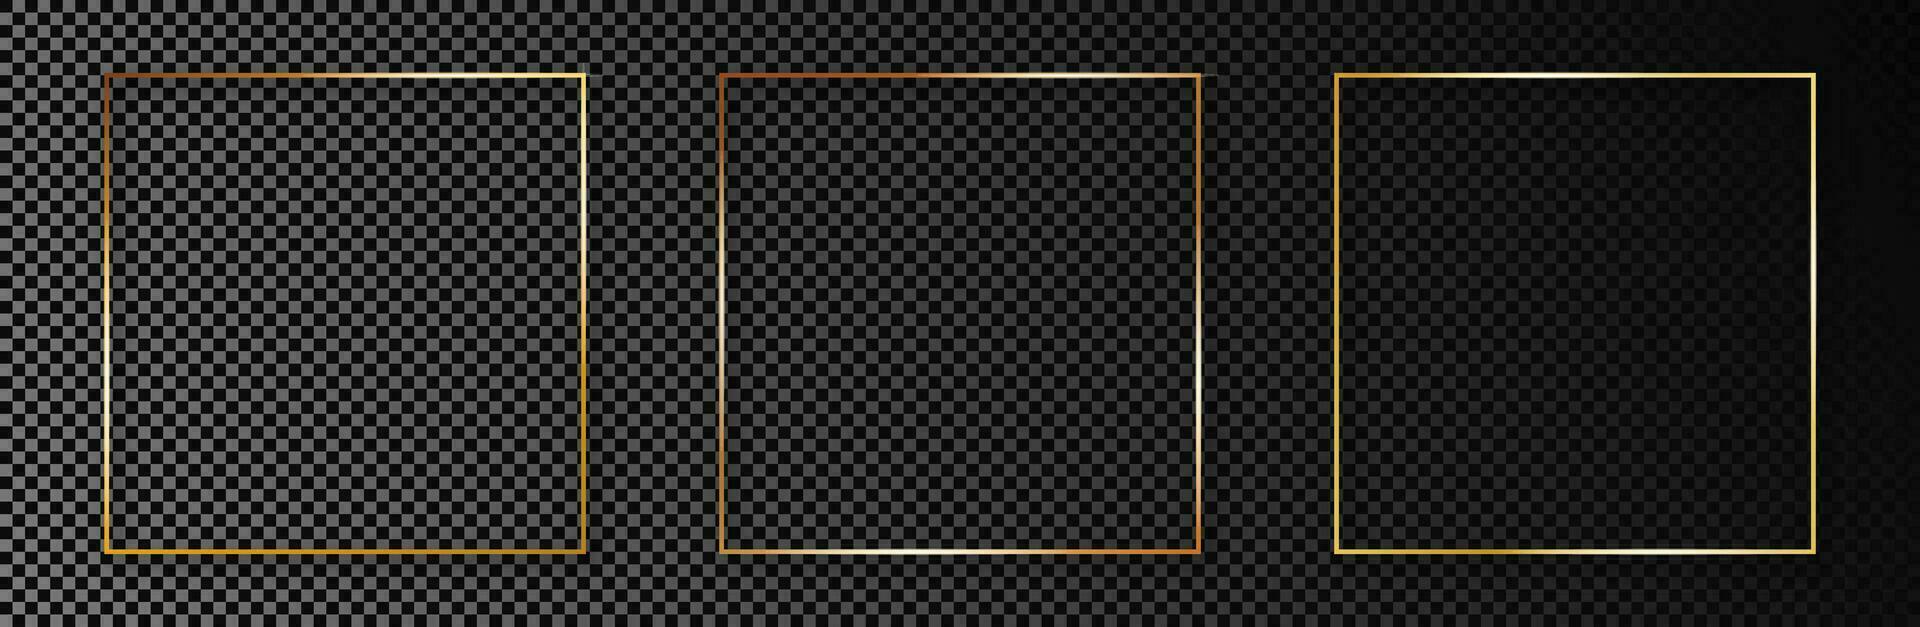 Set of three gold glowing square frames isolated on dark background. Shiny frame with glowing effects. Vector illustration.